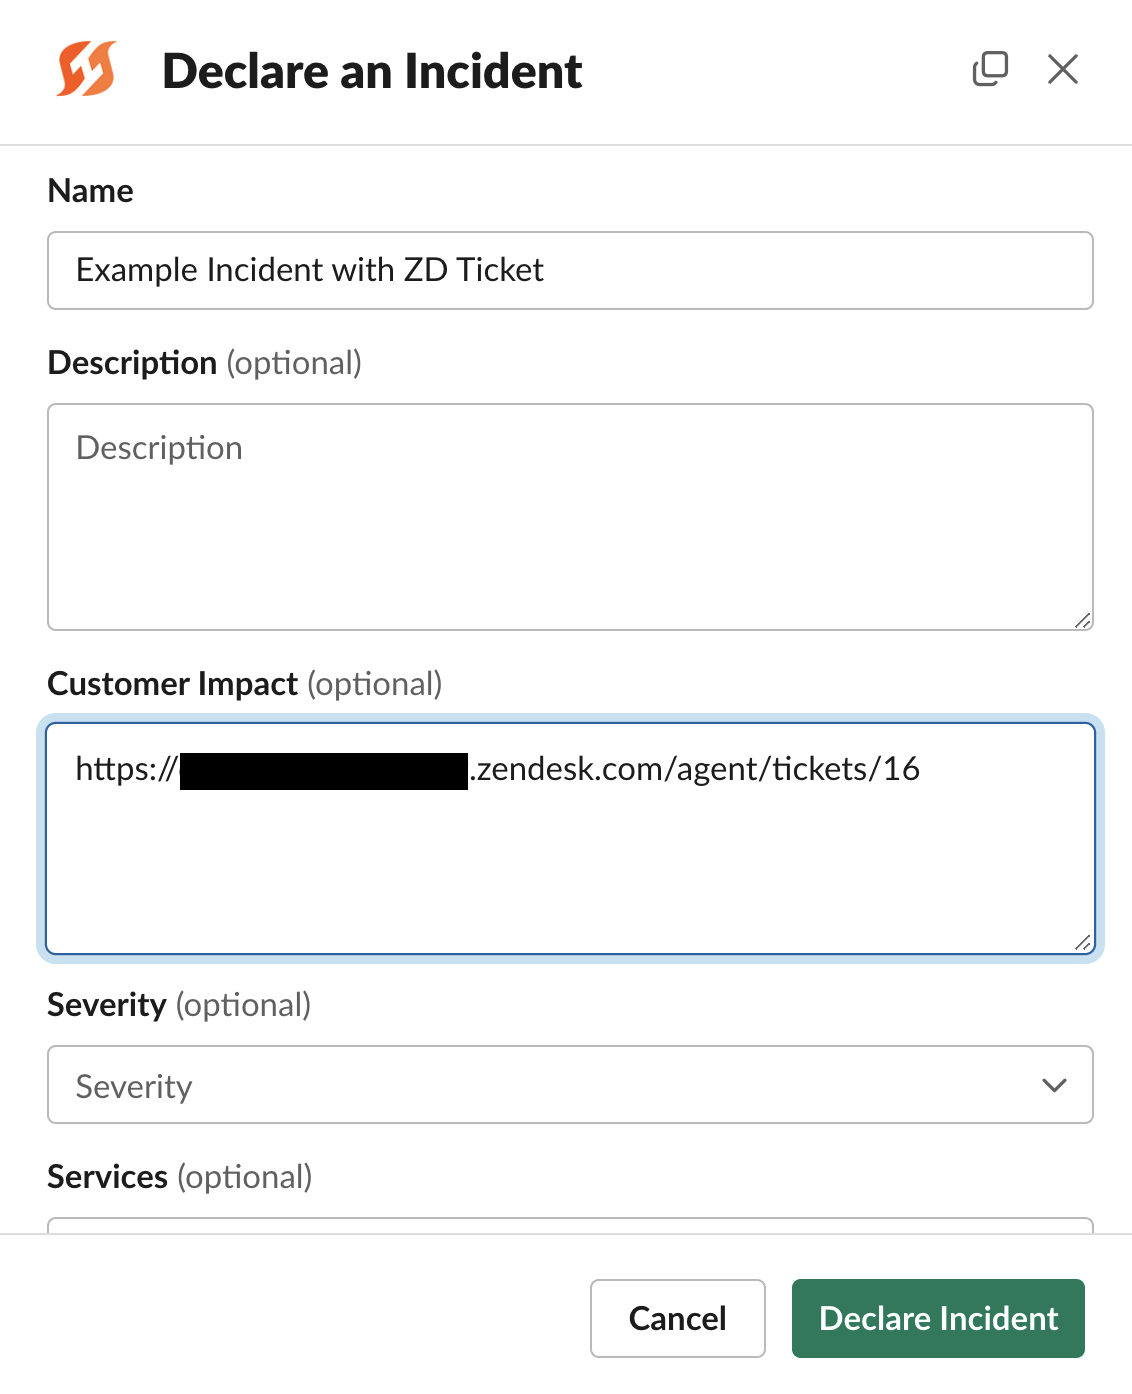 Inserting the ZD link into either **Description** or **Customer Impact** fields